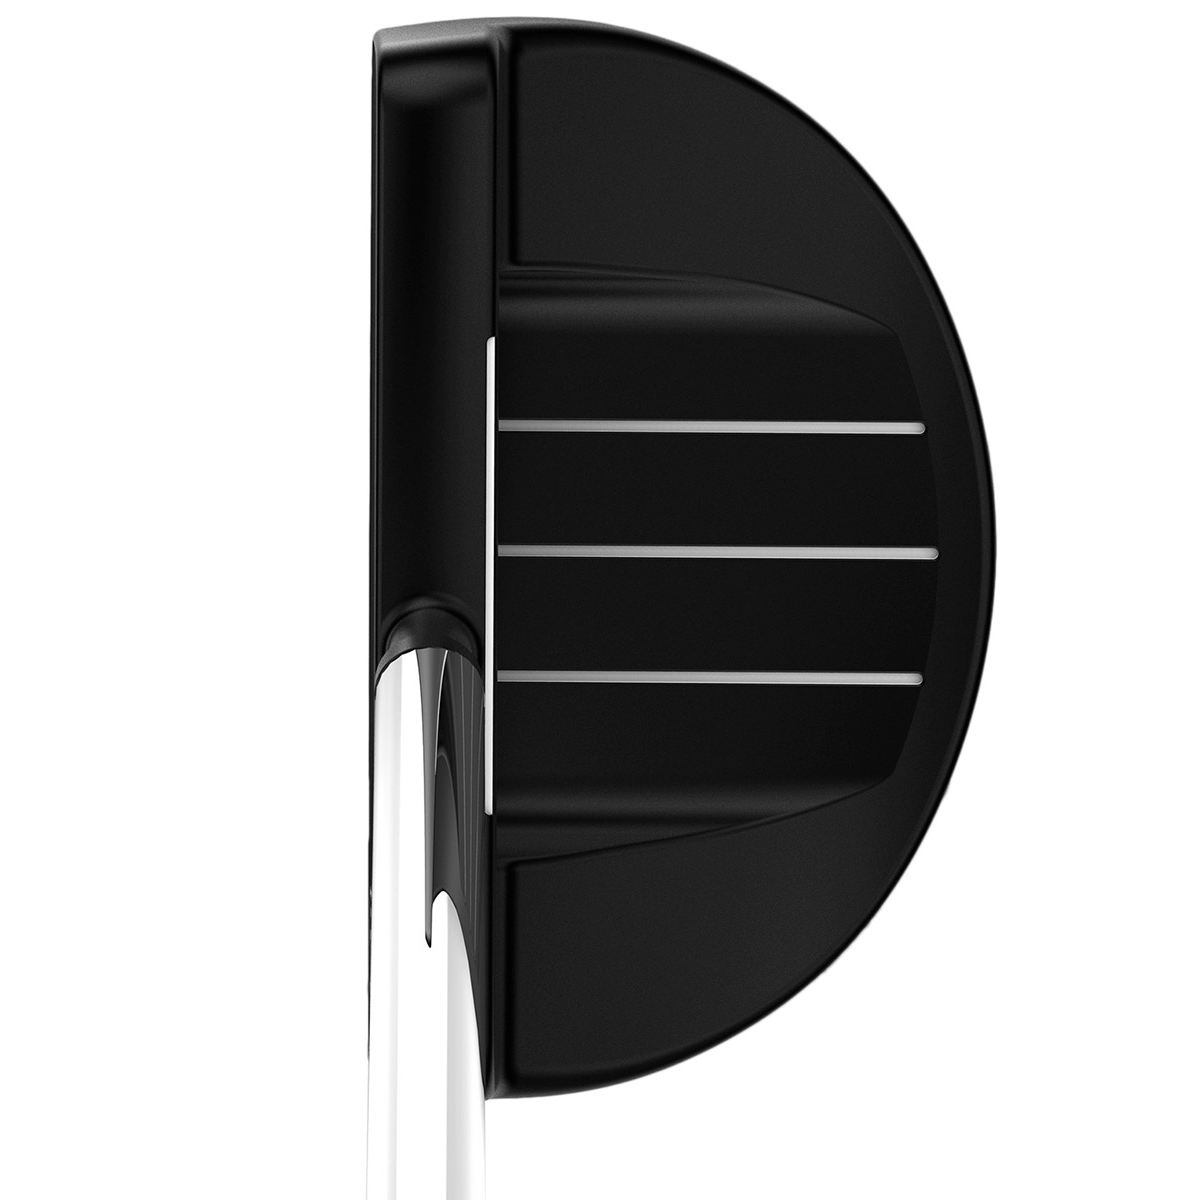 Wilson Infinite South Side Golf Putter from american golf